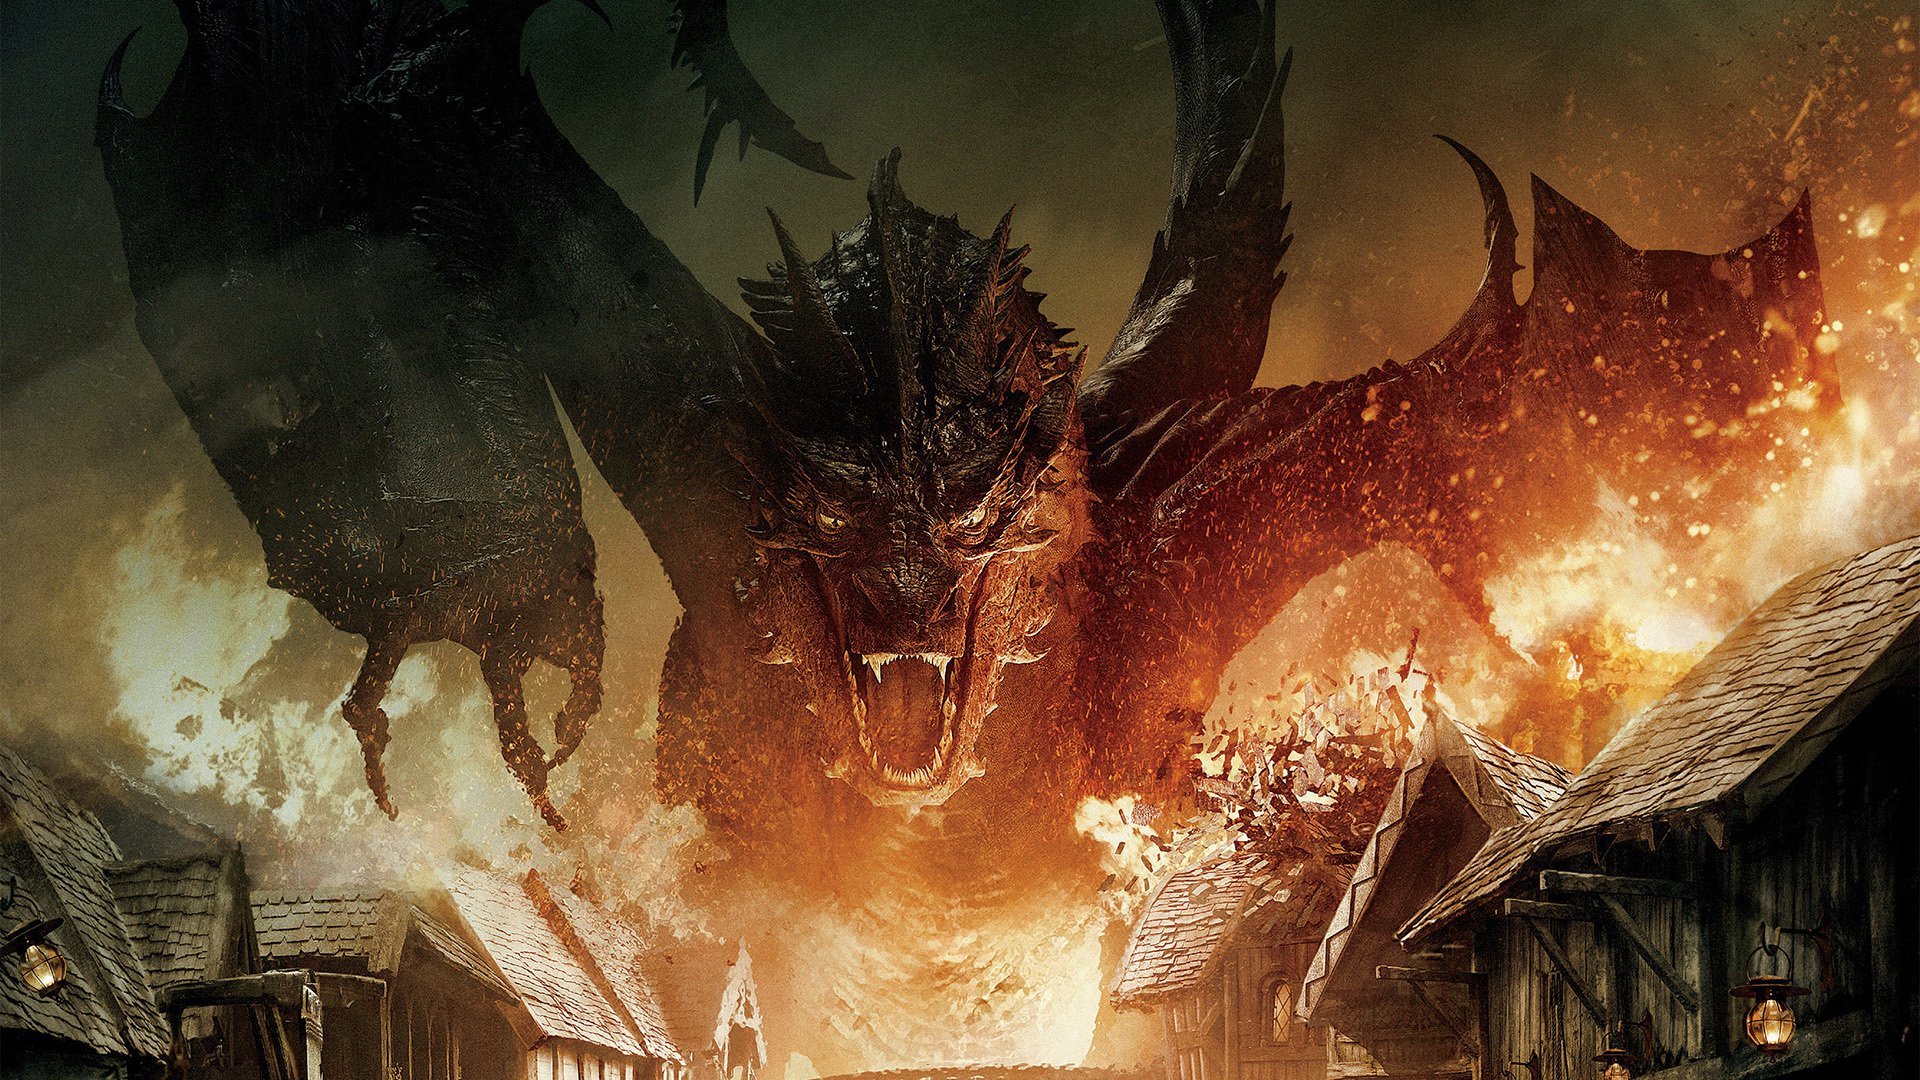 Awesome The Hobbit: The Battle Of The Five Armies free background ID:100614 for full hd 1920x1080 desktop